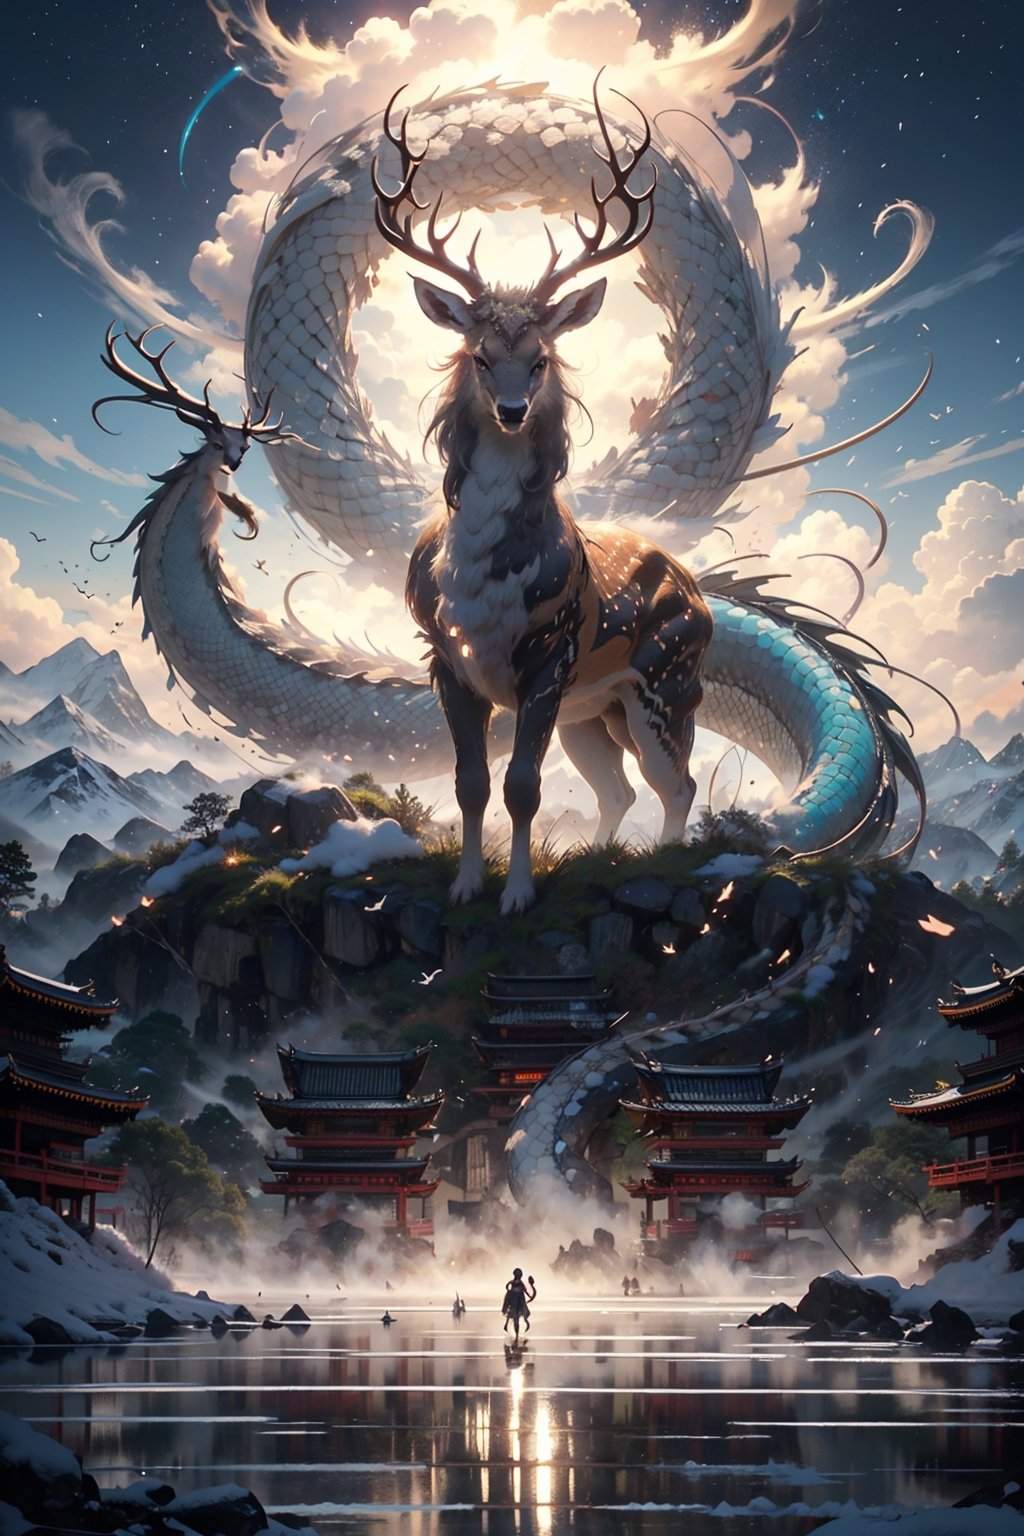 BJ_Sacred_beast, turquoise_eyes, outdoors, deer's horns, sky, cloud, no_humans, bird, cloudy_sky, scenery, stairs, fantasy, dragon orange, detailed black, white ornate, architecture, east_asian_architecture, eastern_dragon, cinematic lighting, strong contrast, high level of detail, Best quality, masterpiece, lora:Sacred_beast_v1.2:0.7,